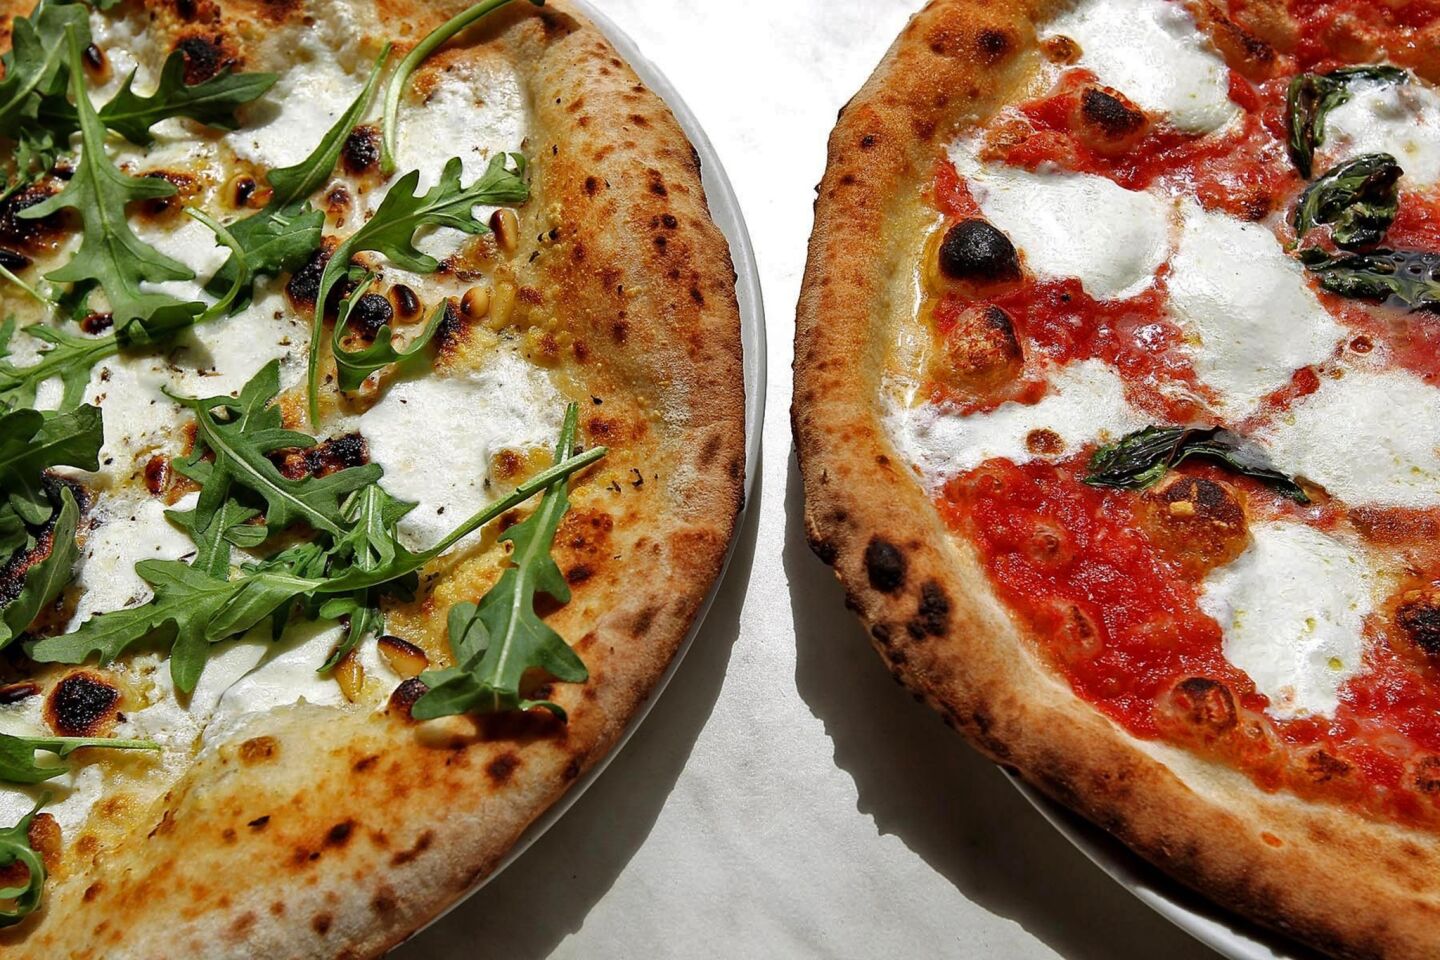 A pizza bianca with mozzarella, pine nuts and arugula, left, and a pizza margherita, right, are offered at 800 Degrees Neapolitan Pizzeria in Westwood Village.